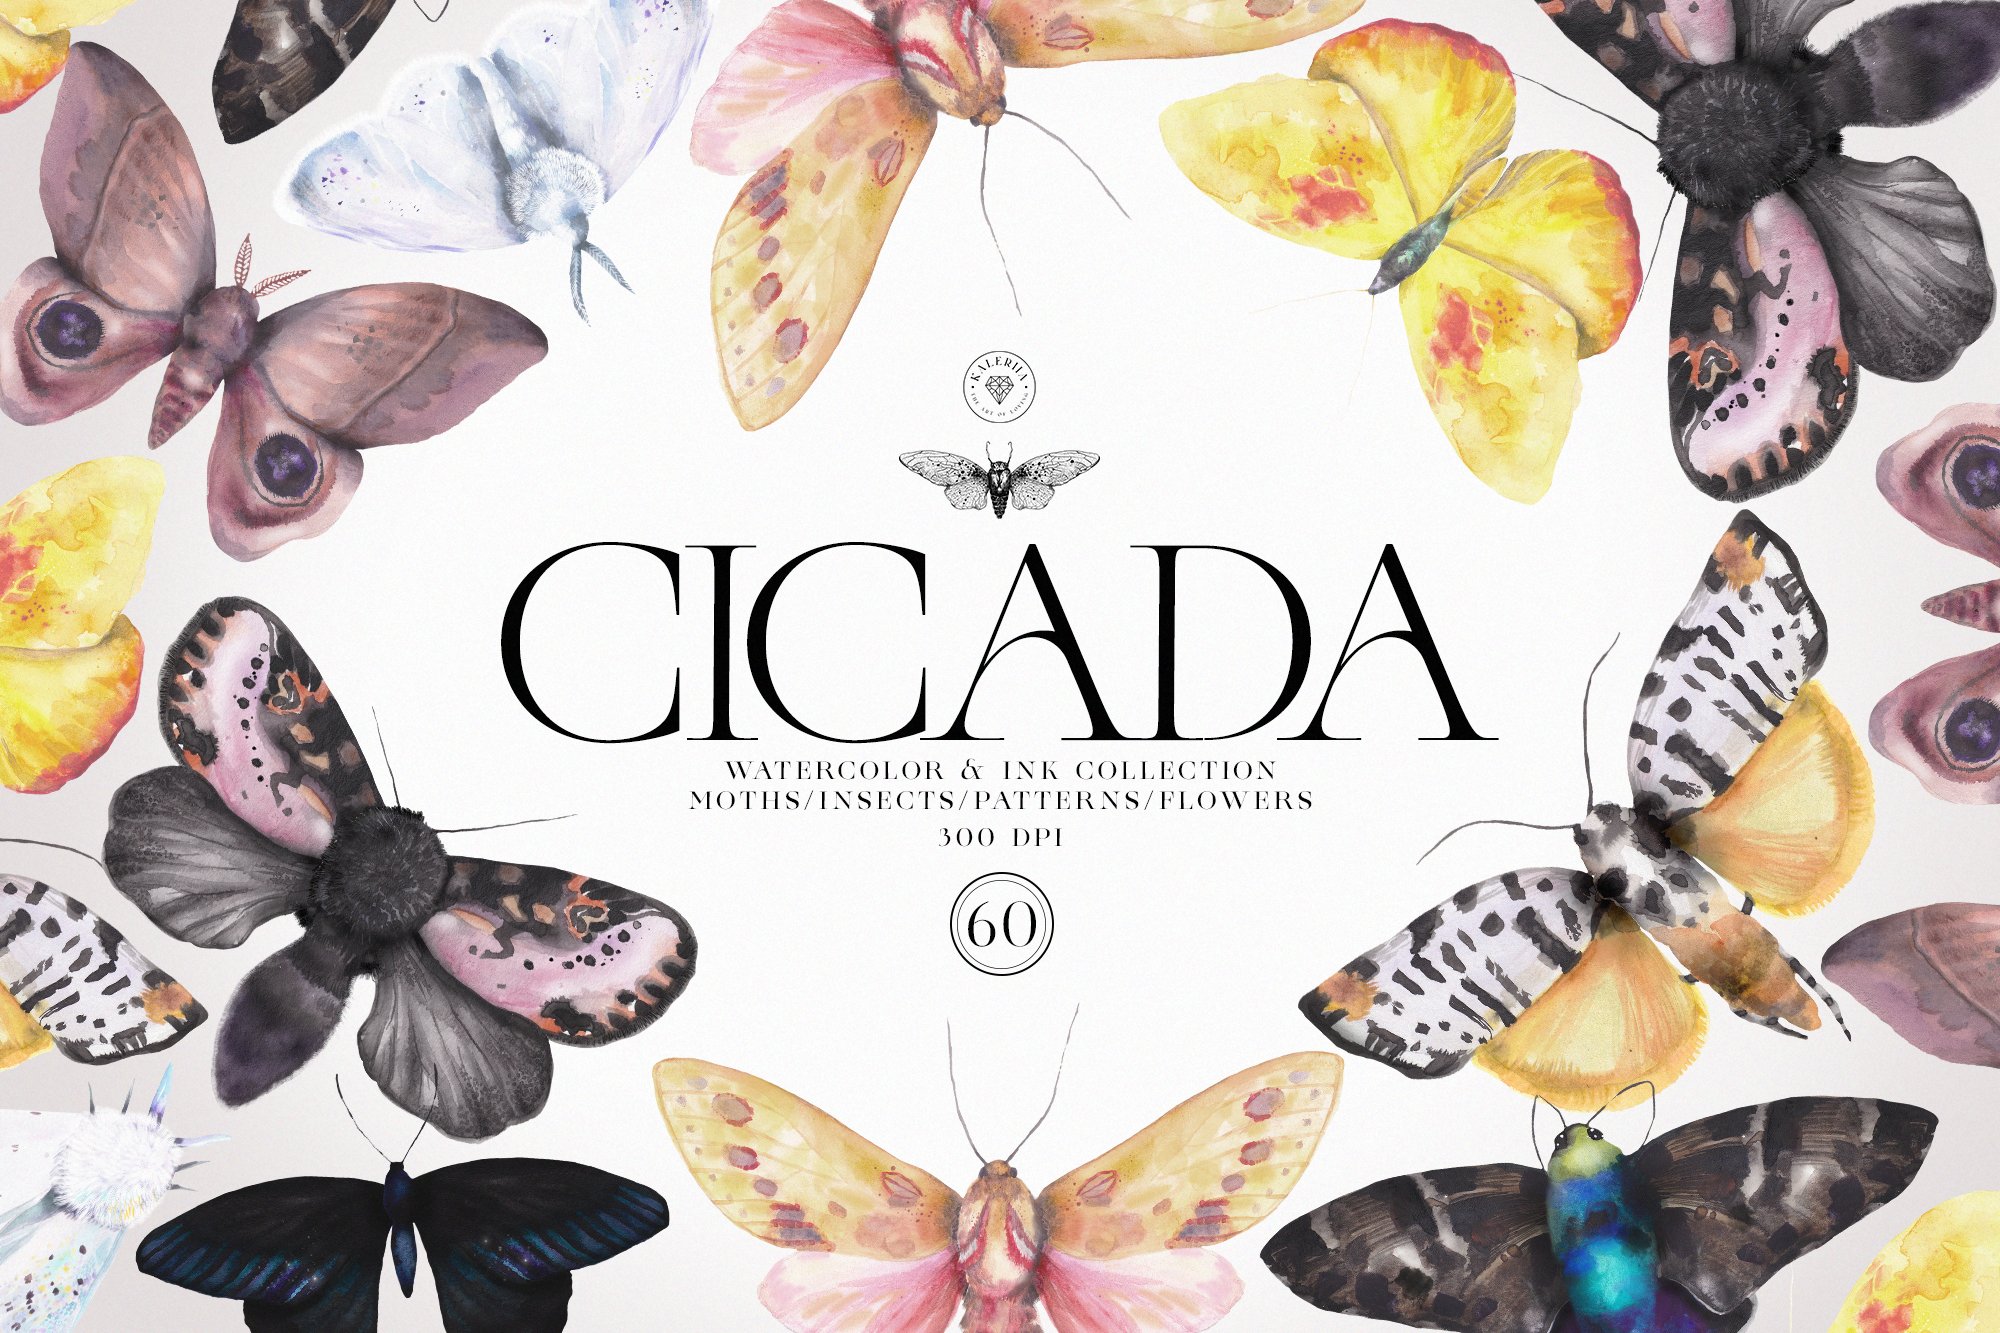 Cicada - Insects & Flowers Ink Set cover image.